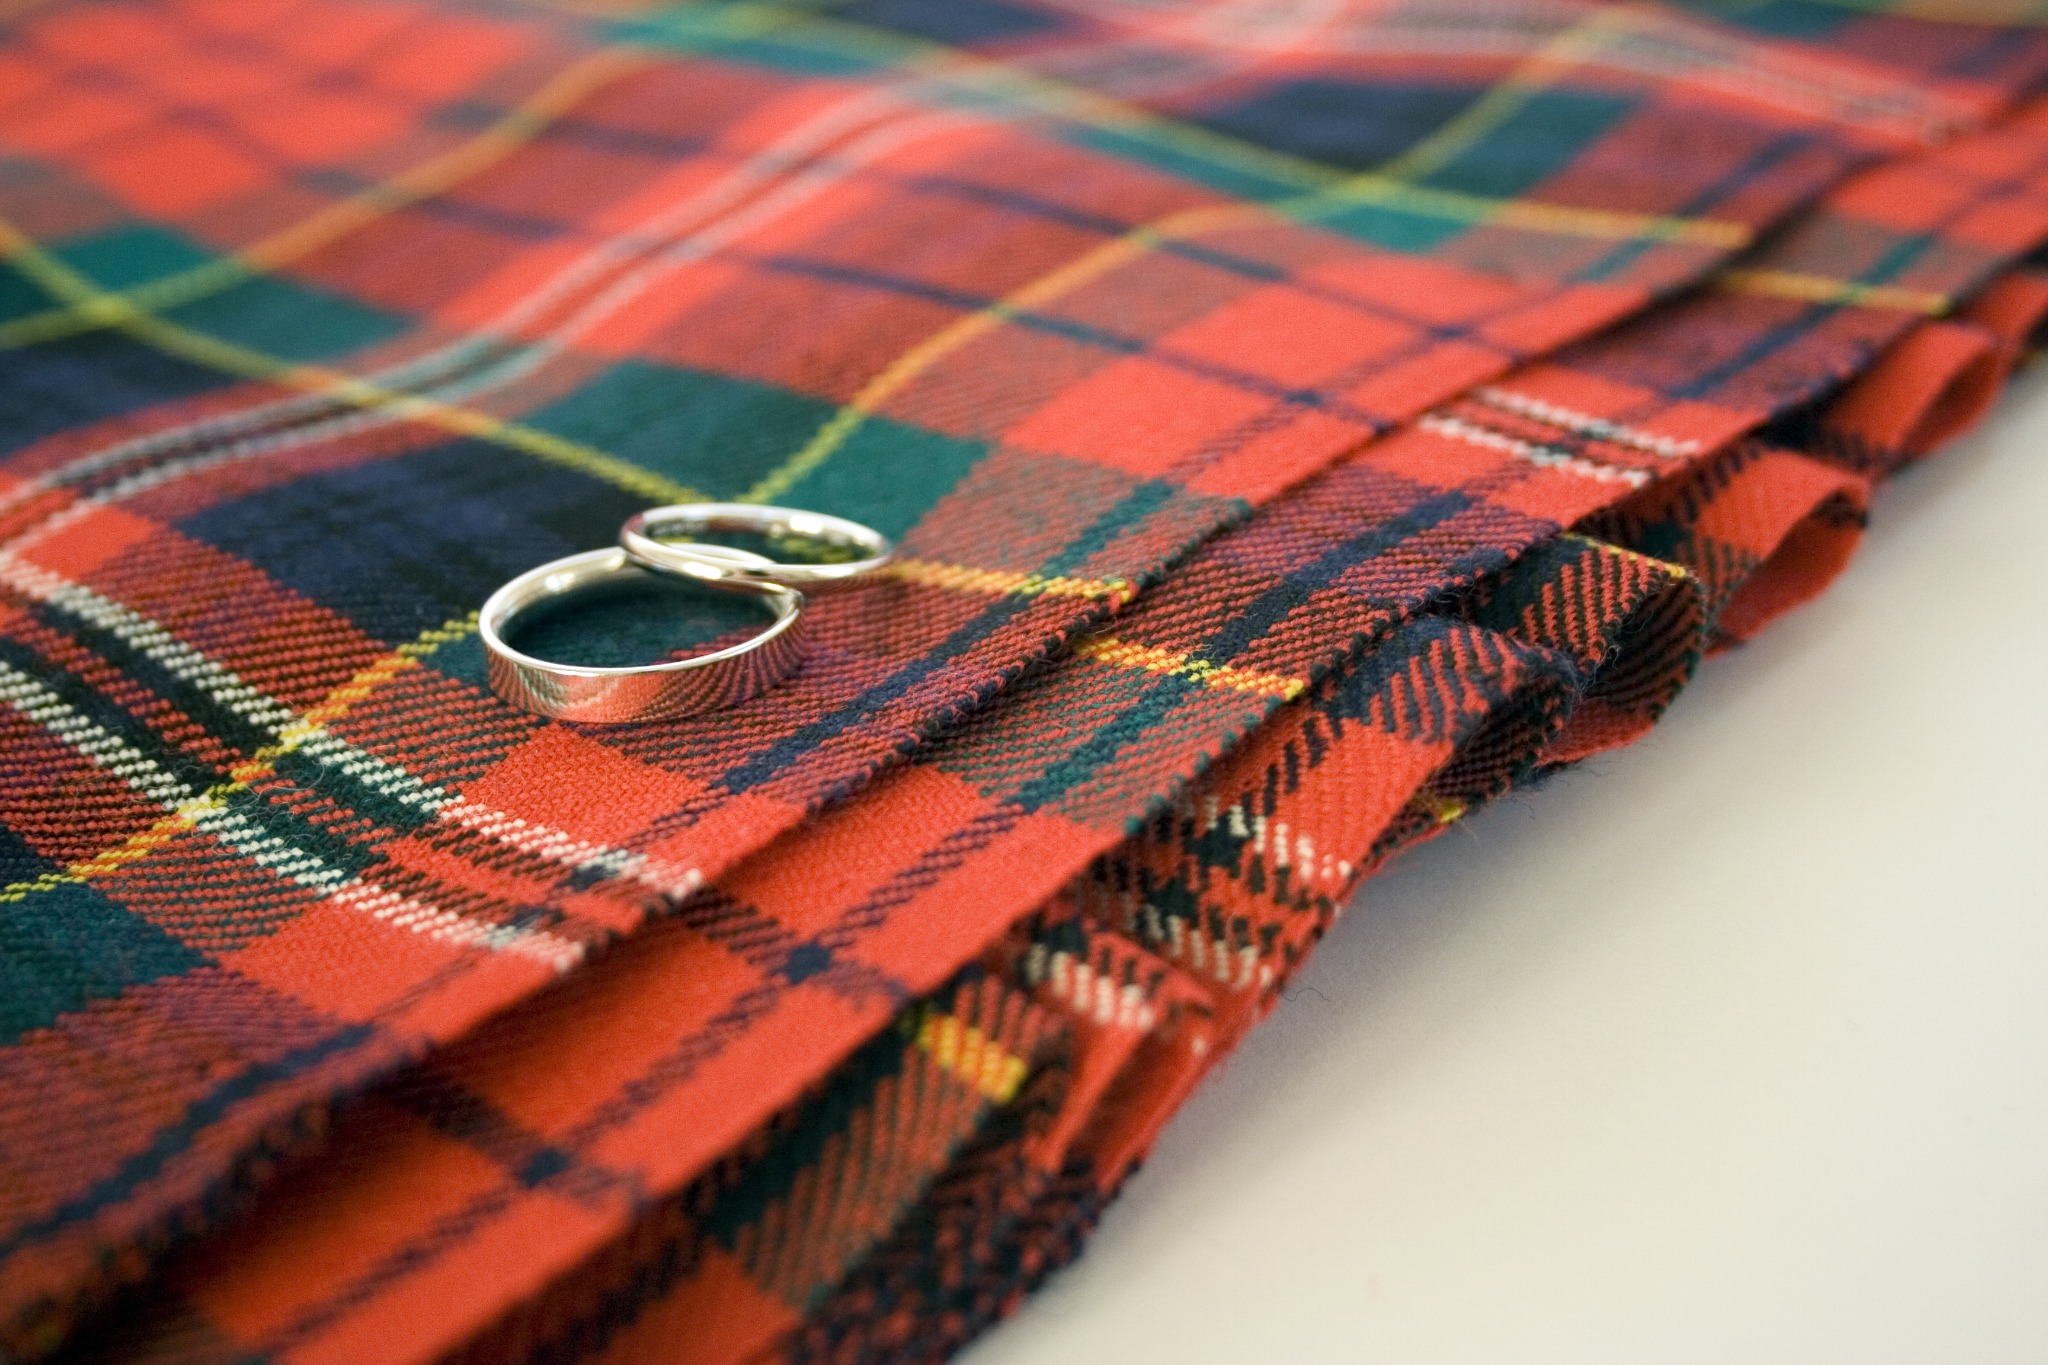 Wedding rings on a piece of red tartan